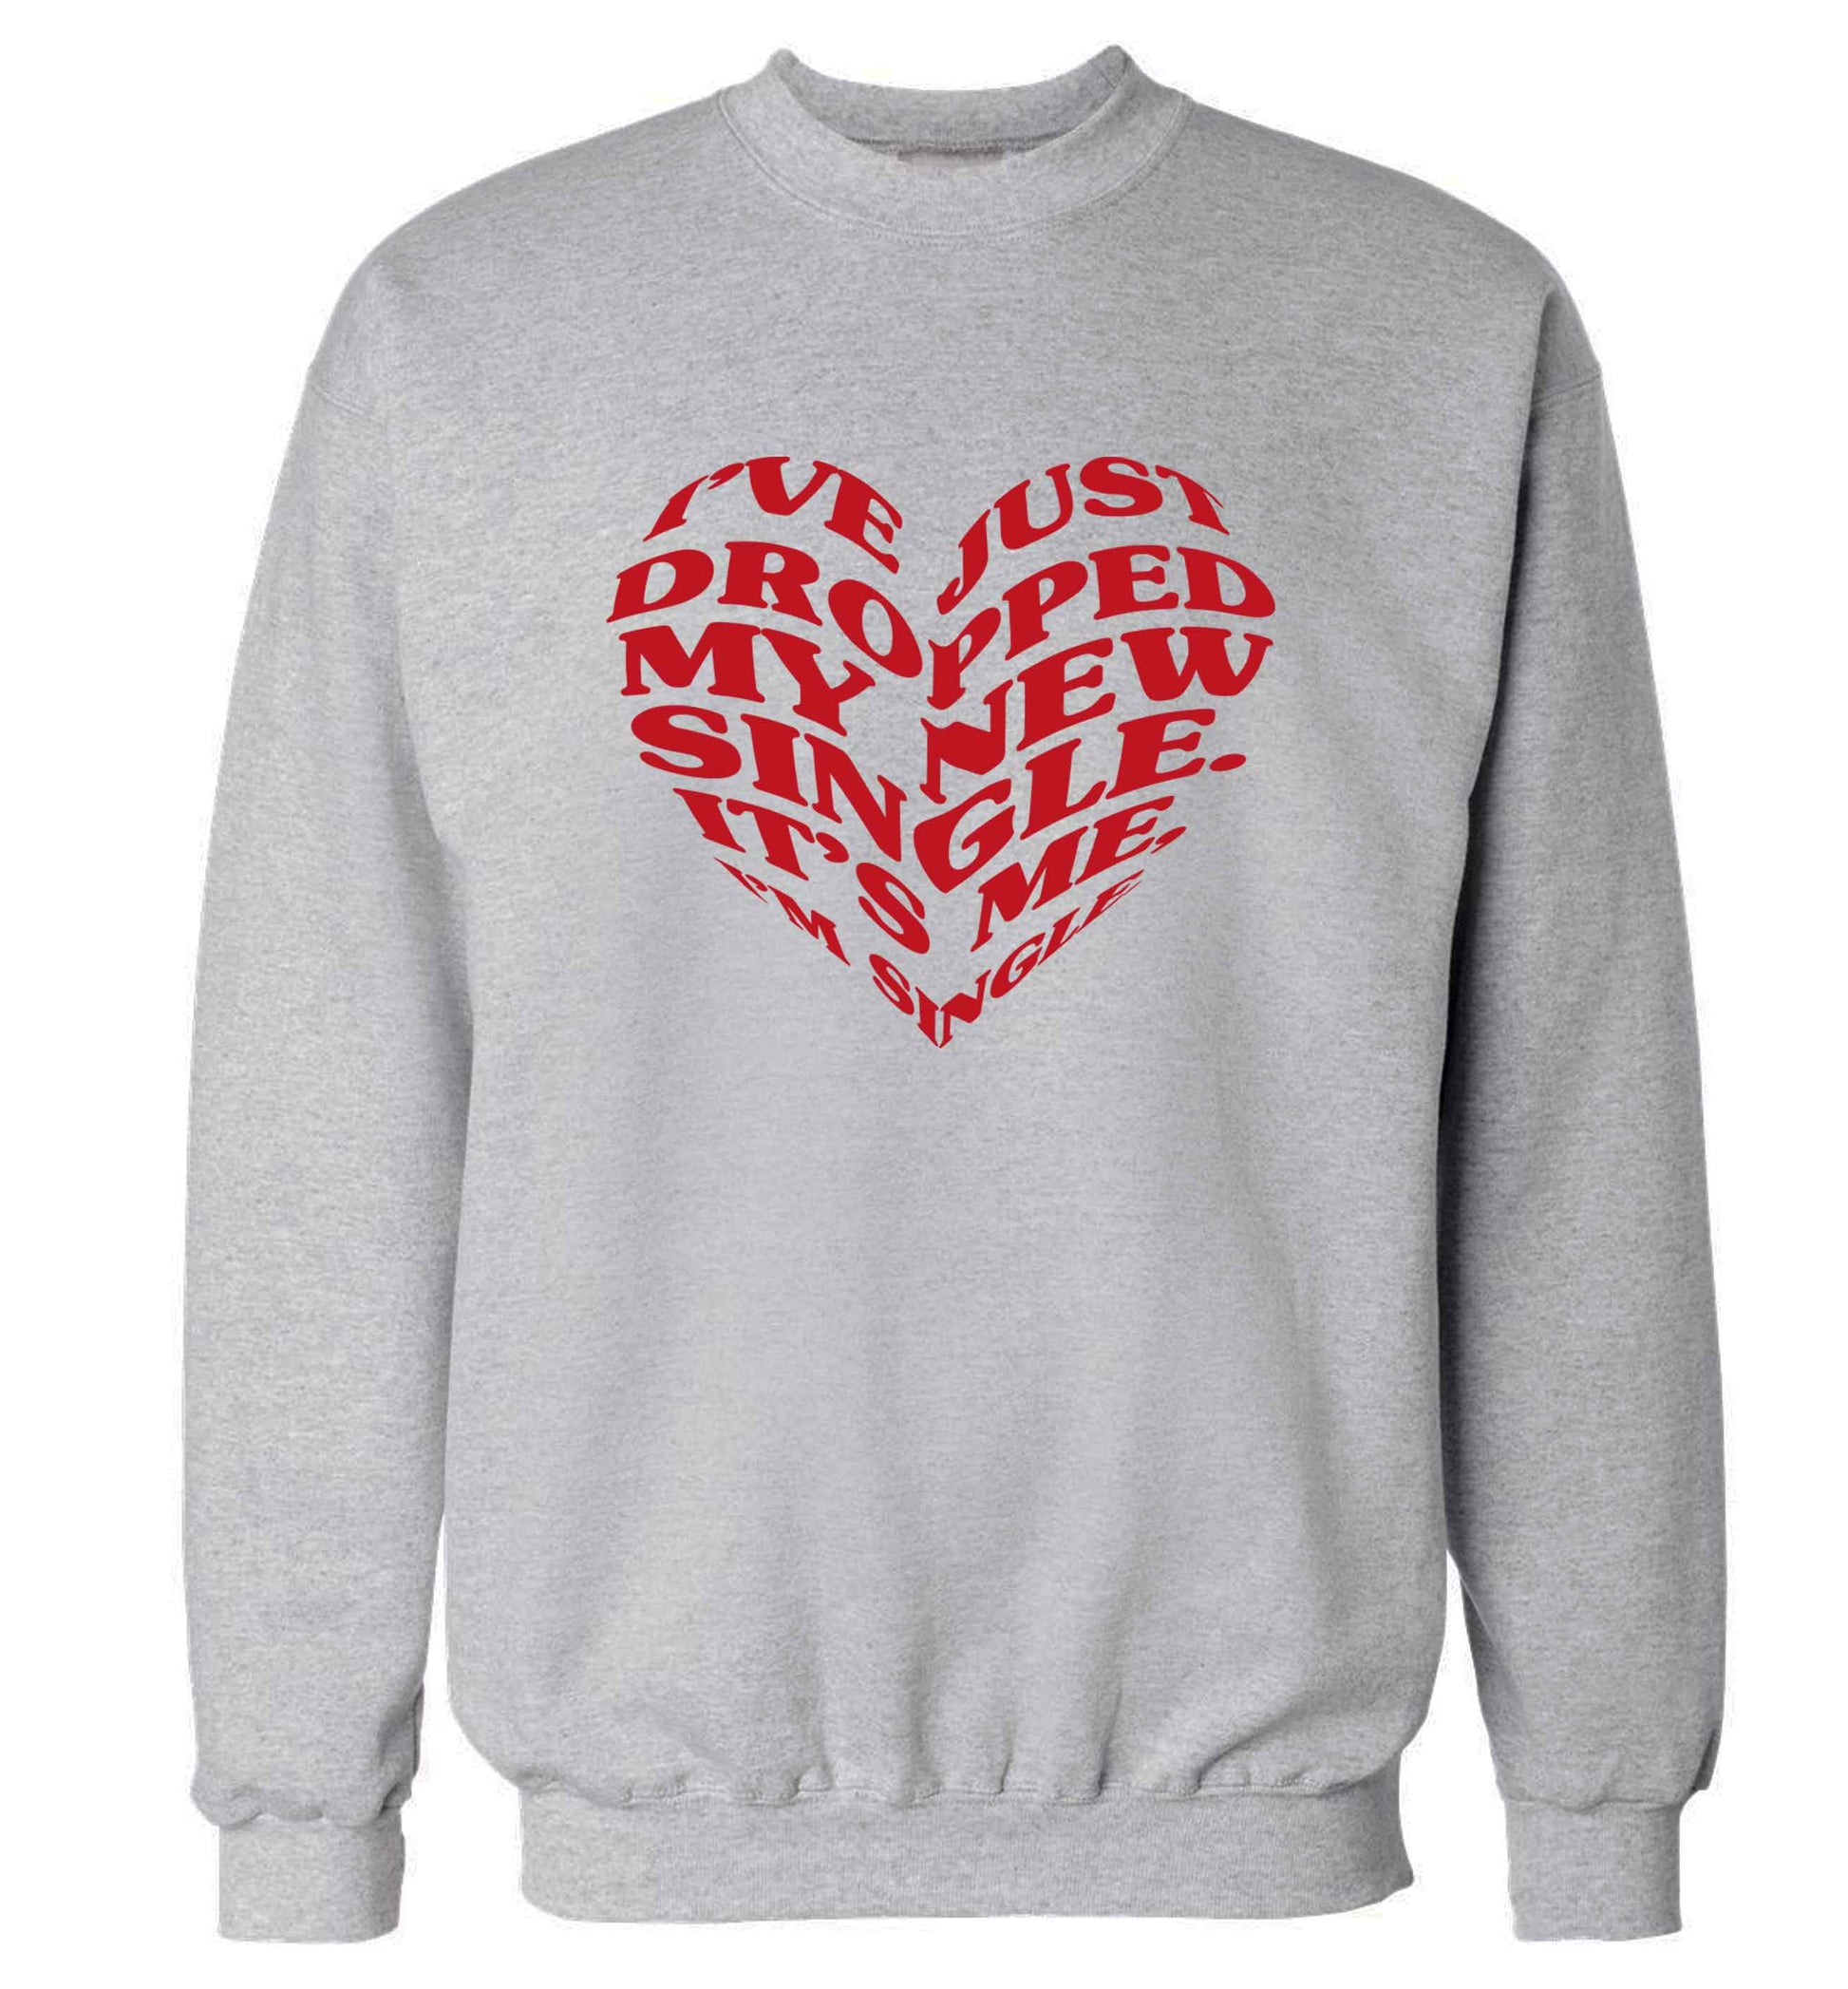 I've just dropped my new single it's me I'm single adult's unisex grey sweater 2XL